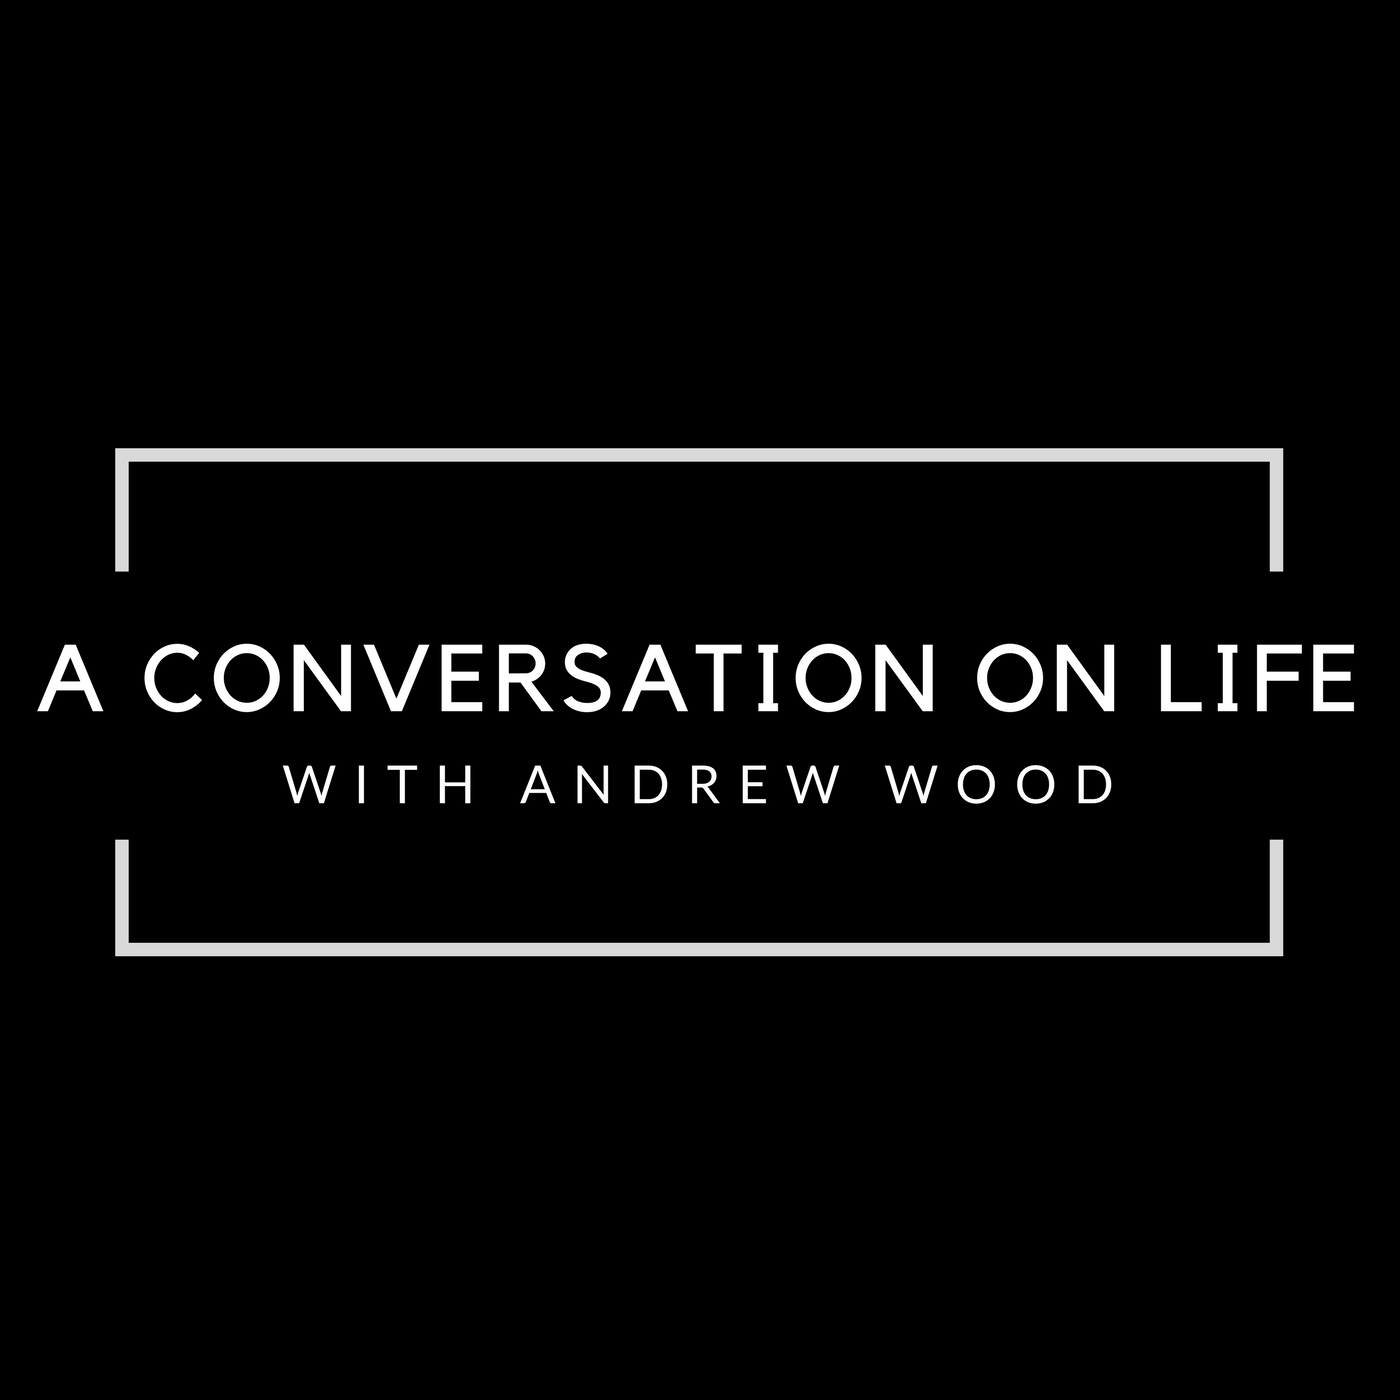 Medical Advancement, Parenting Education, and Rational Discussion on Life